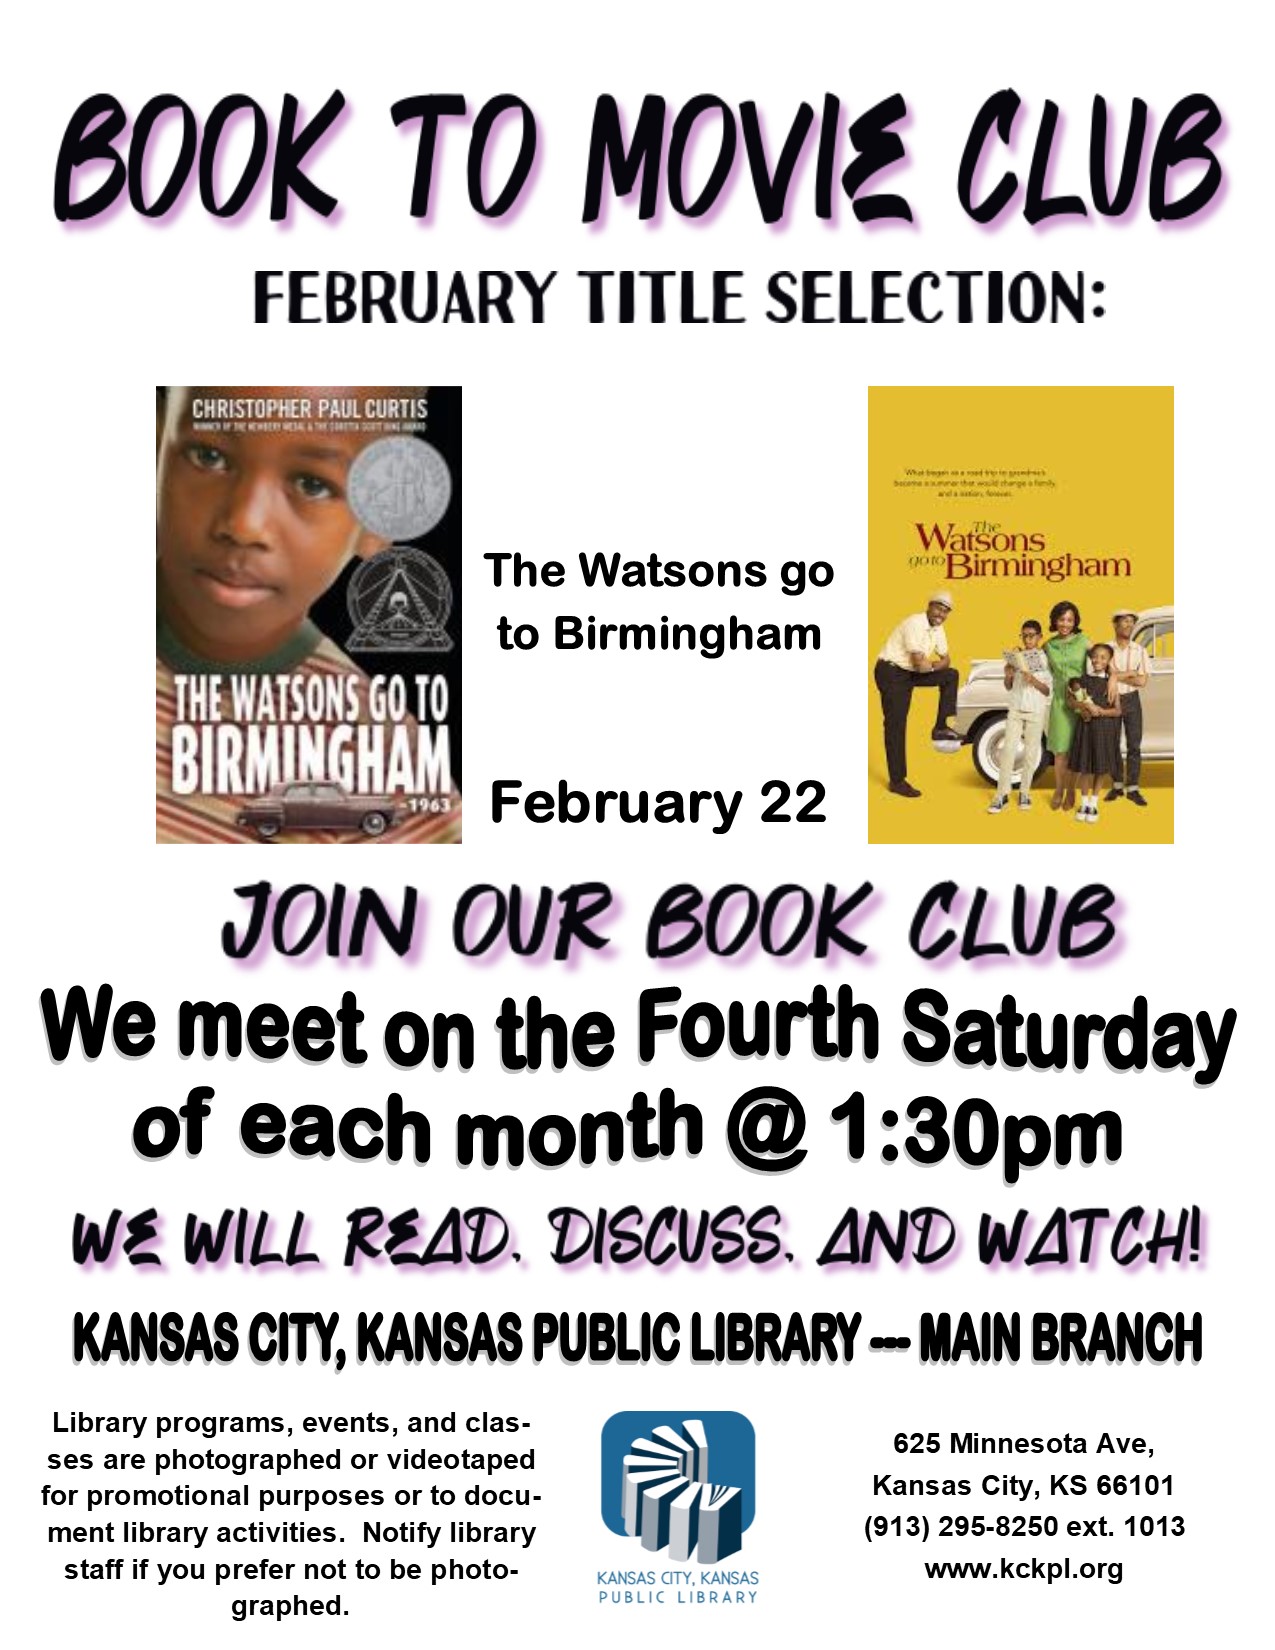 Join our book to movie club. We meet on the Fourth Saturday of each month at 1:30pm. For the month of February we will be reading and watching: The Watsons Go to Birmingham.